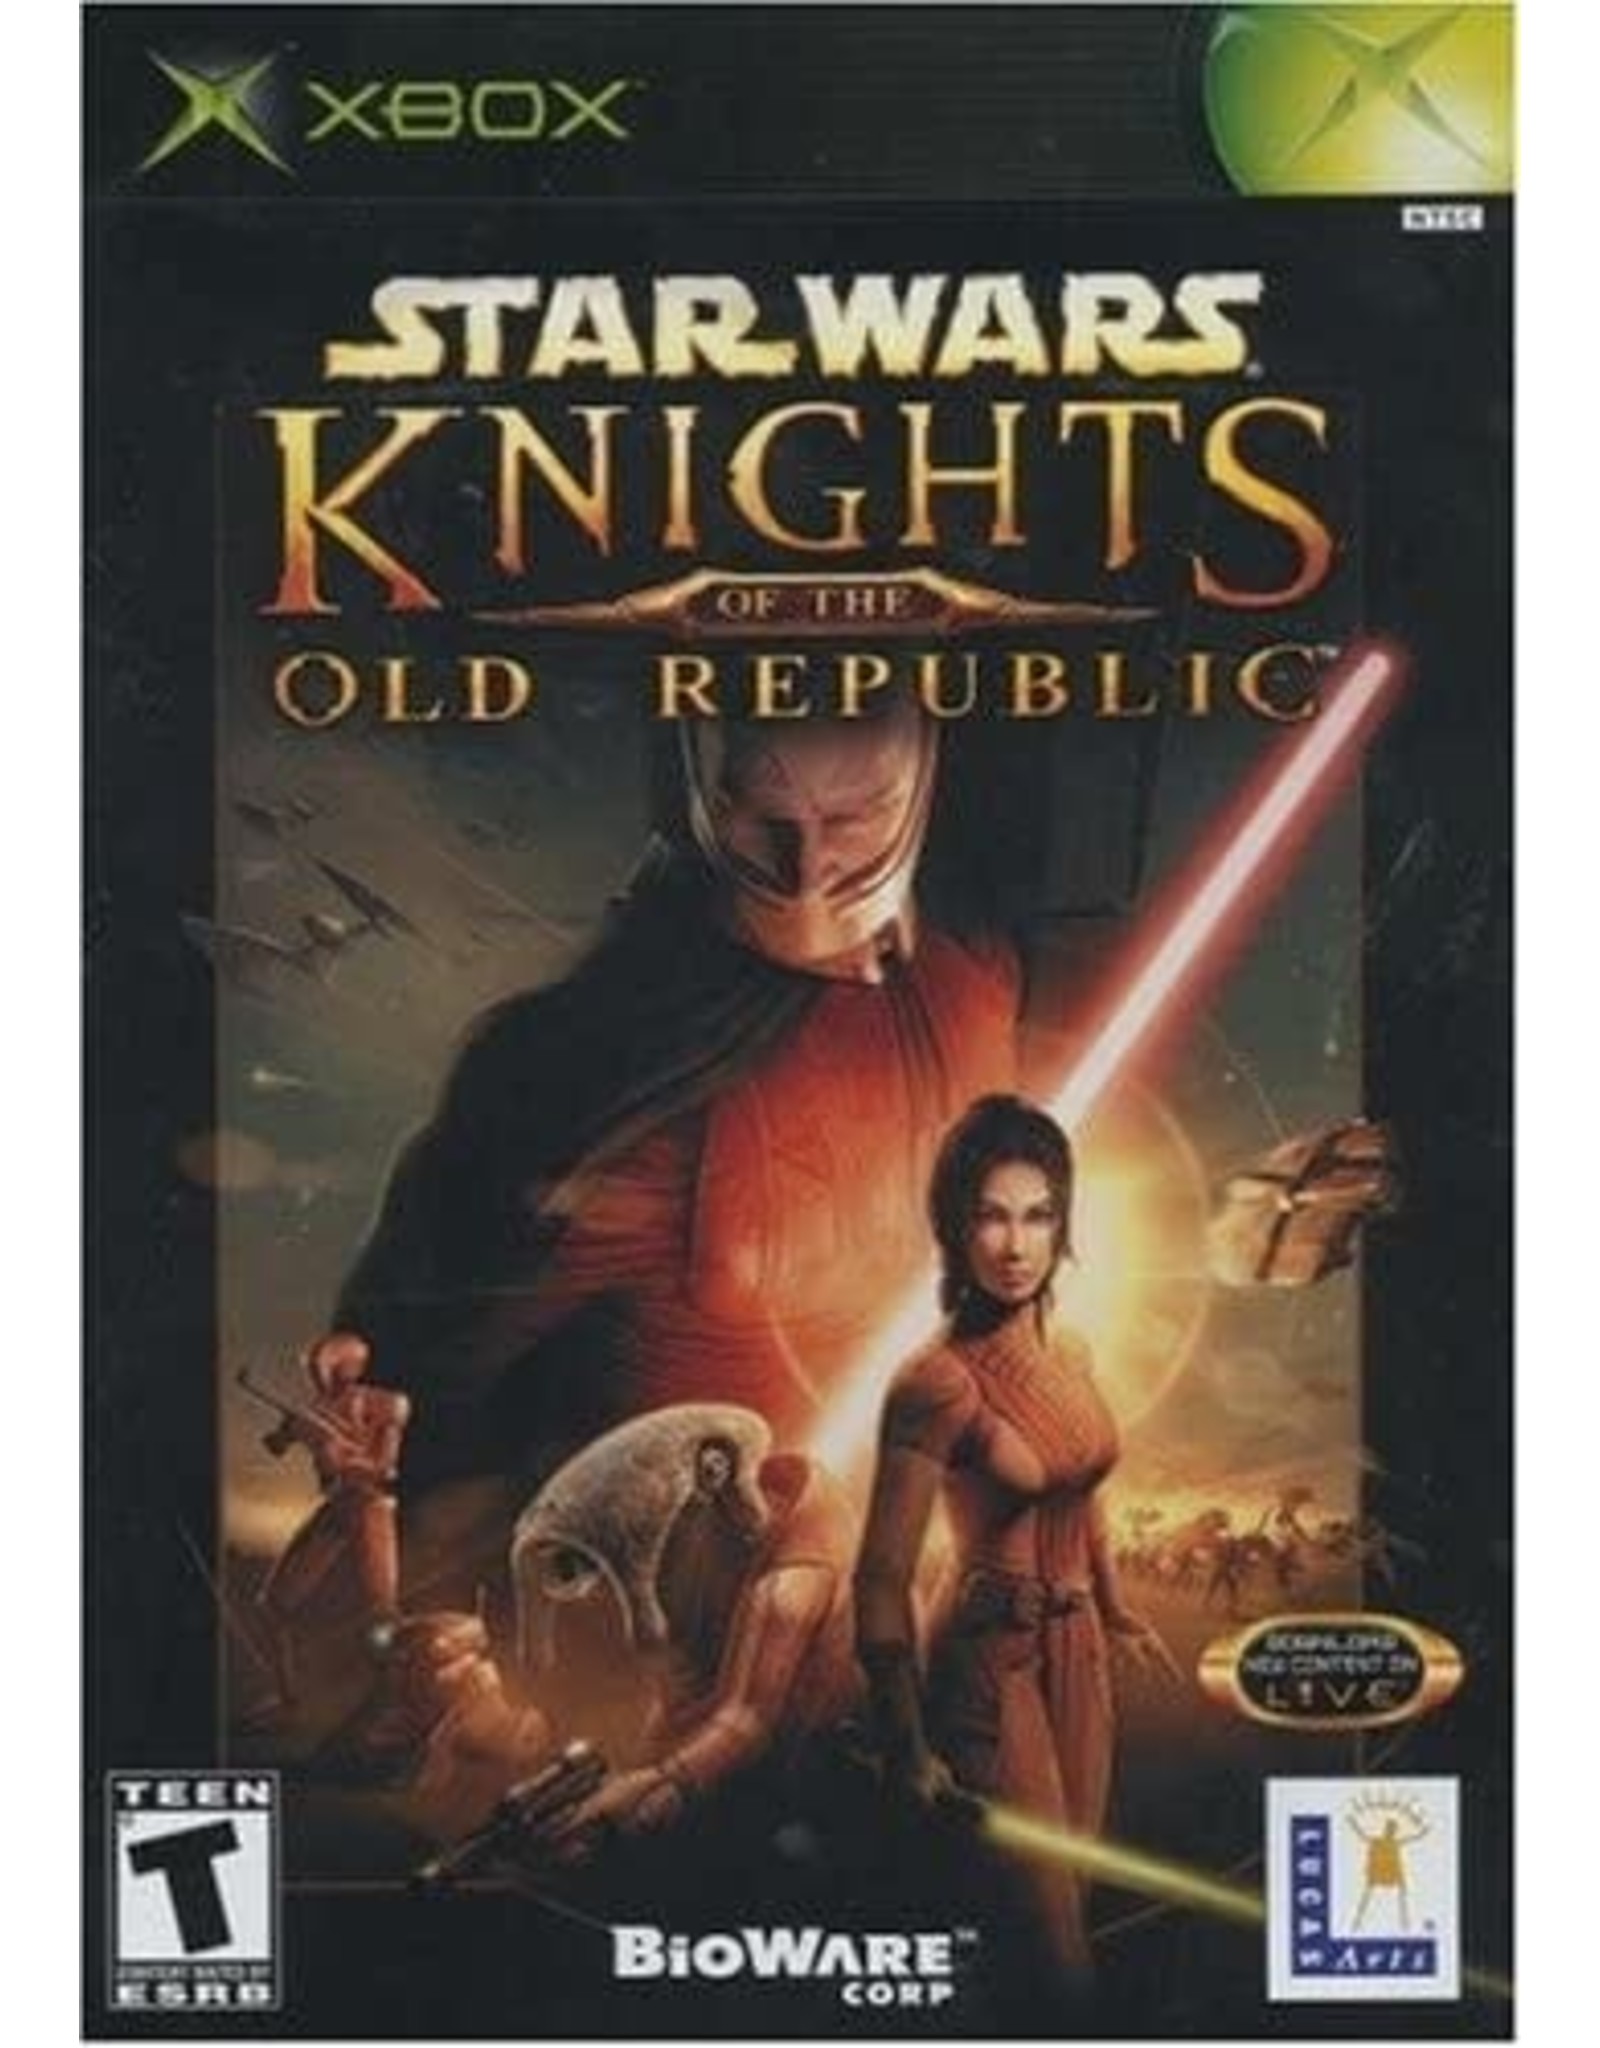 Xbox Star Wars Knights of the Old Republic (Used)